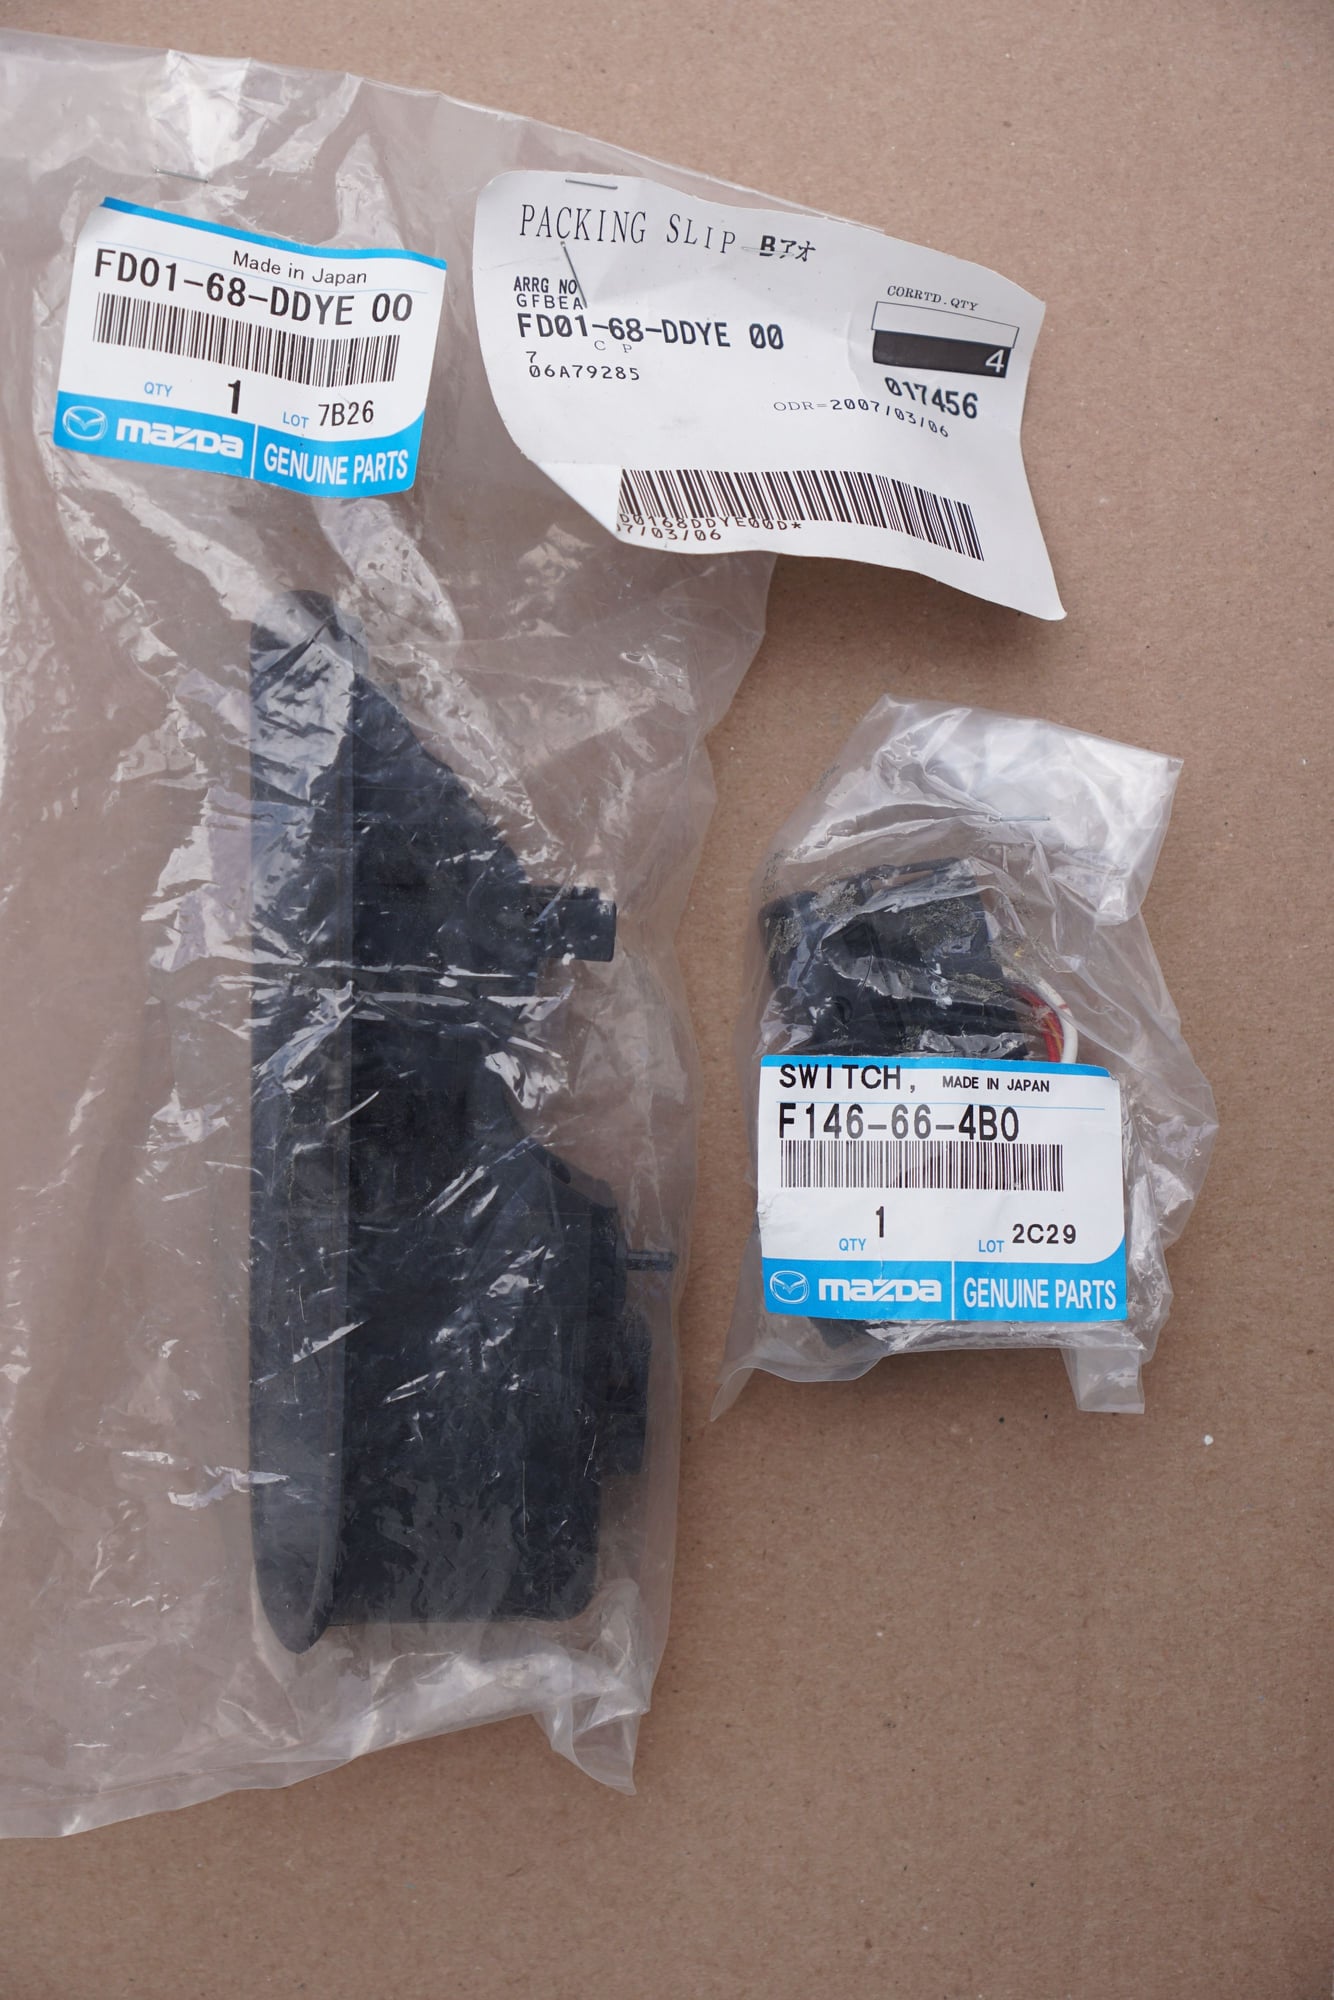 Interior/Upholstery - Aftermarket and OEM Interior Bits - New - 1992 to 2002 Mazda RX-7 - Chicago, IL 60605, United States